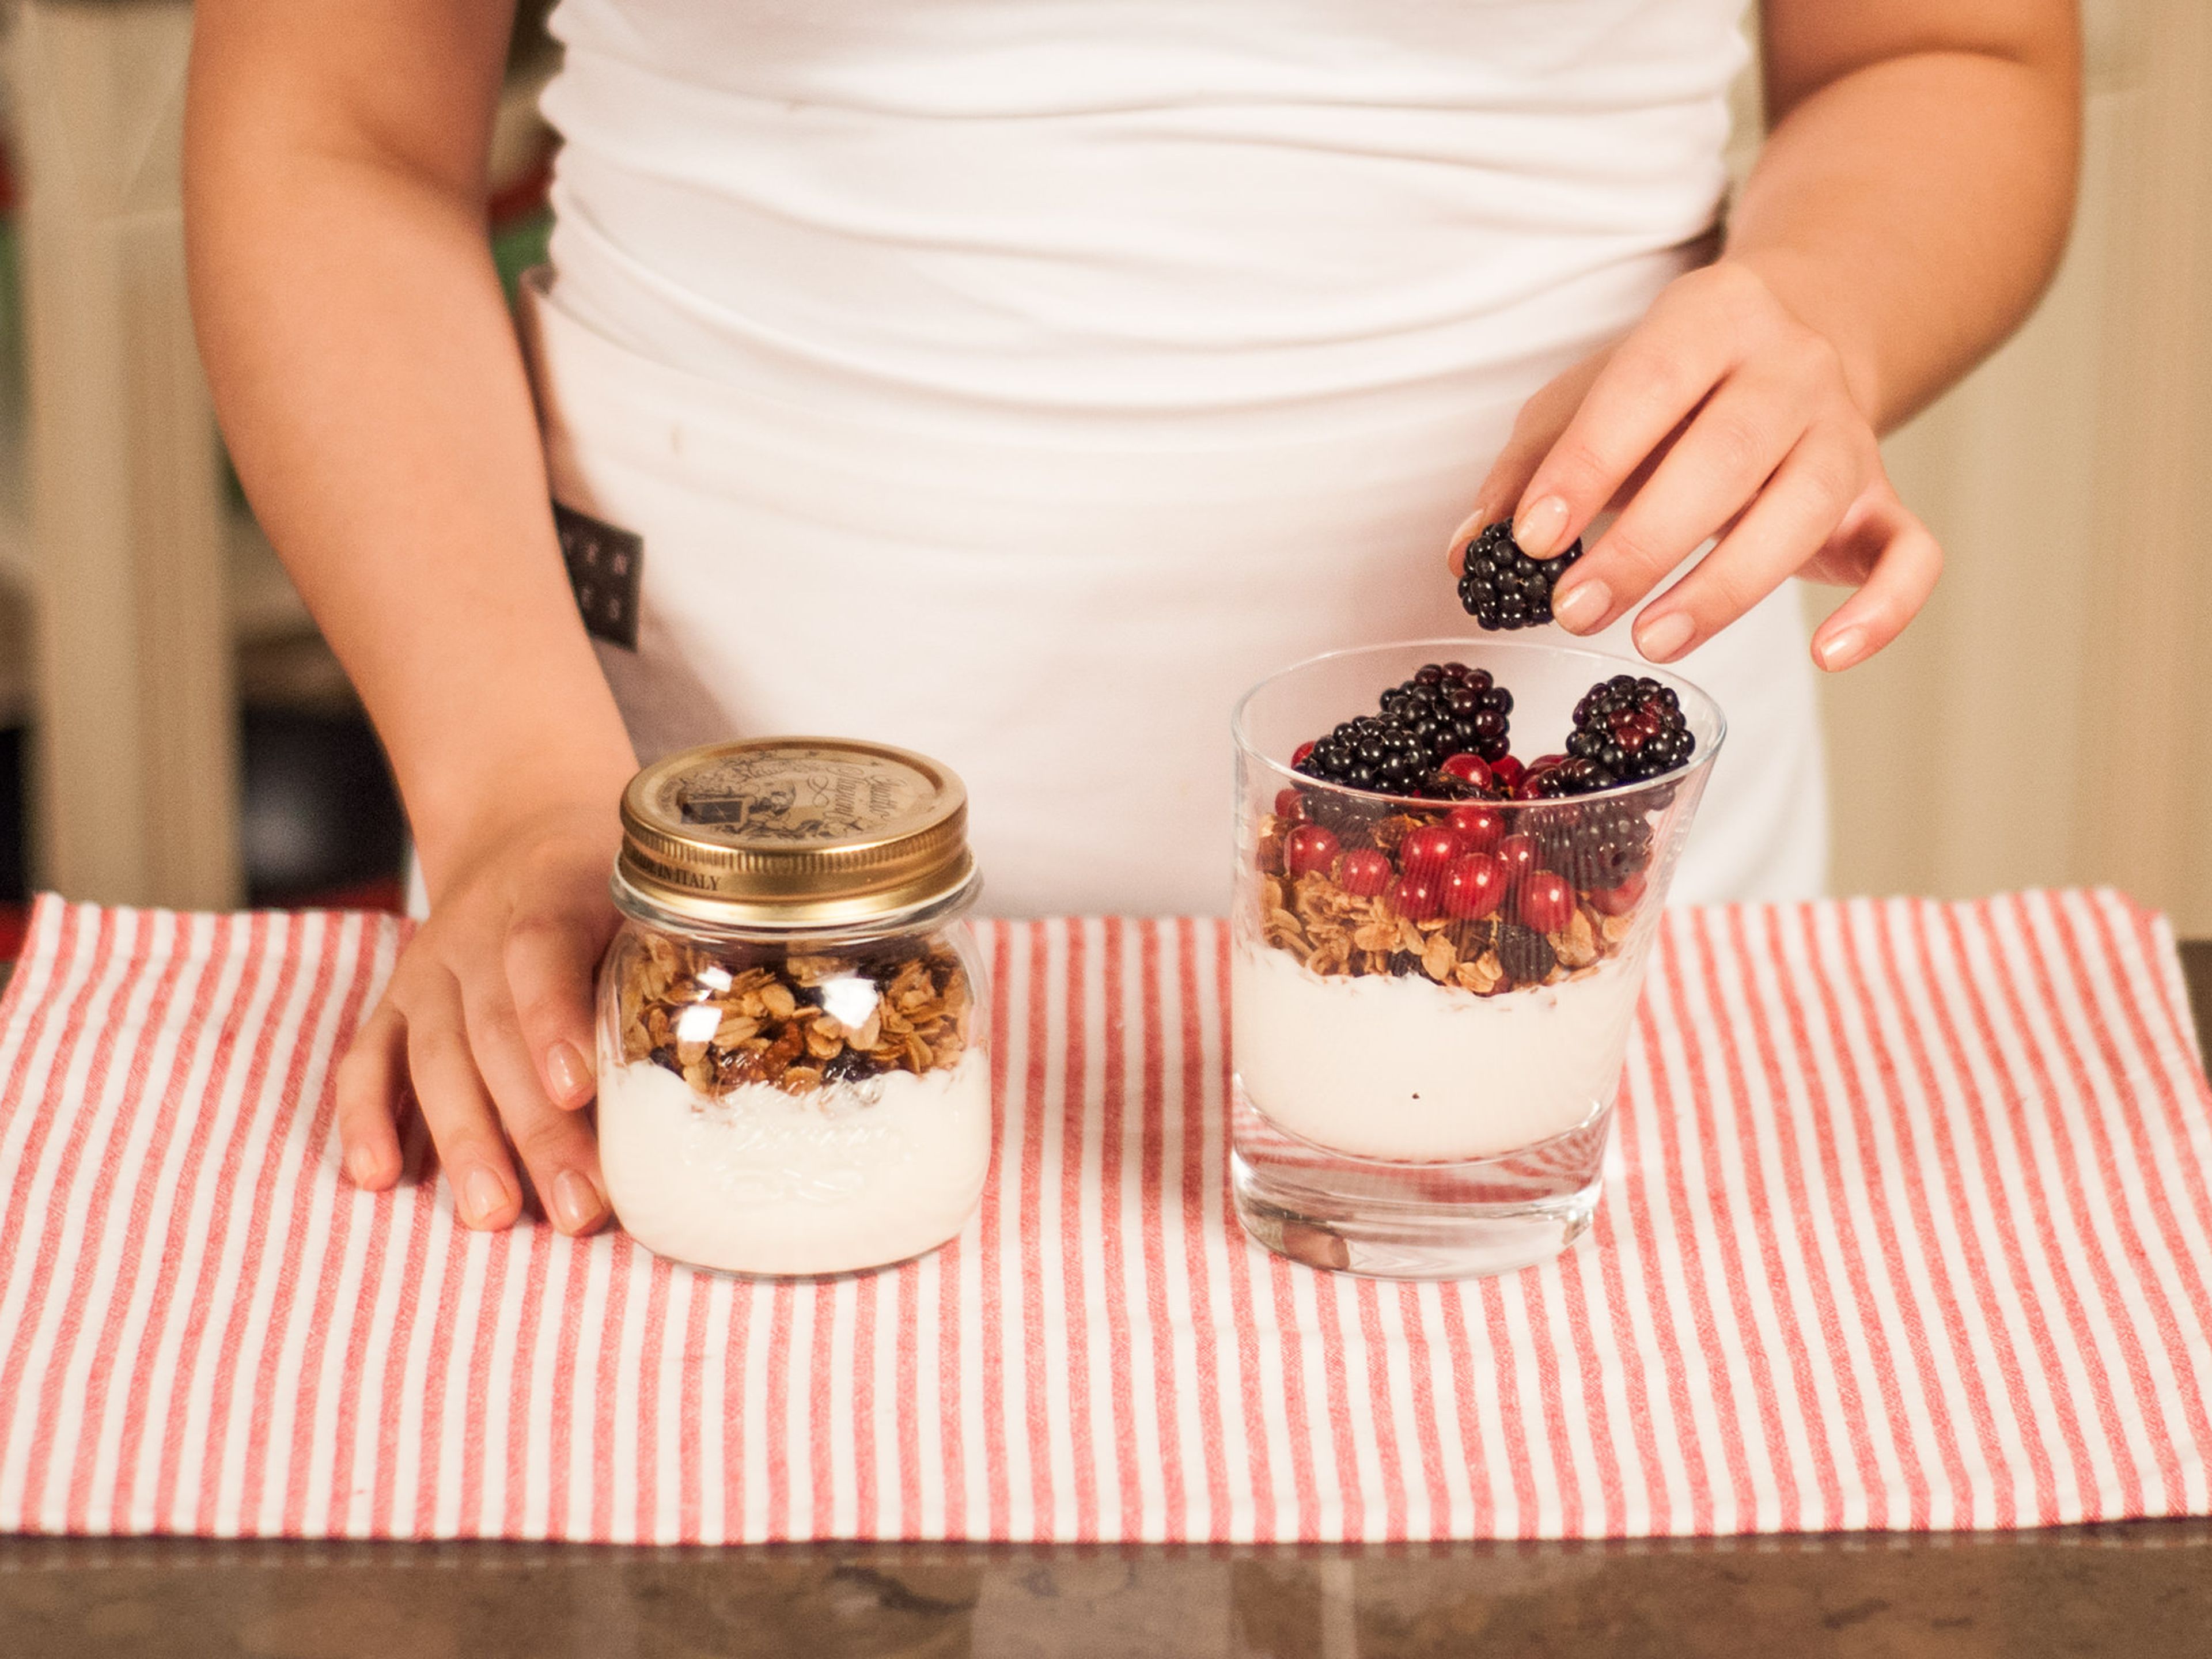 In a glass, layer the yogurt and the granola. Top with berries. Serve with more maple syrup and cinnamon for a sweeter flavor. Enjoy!